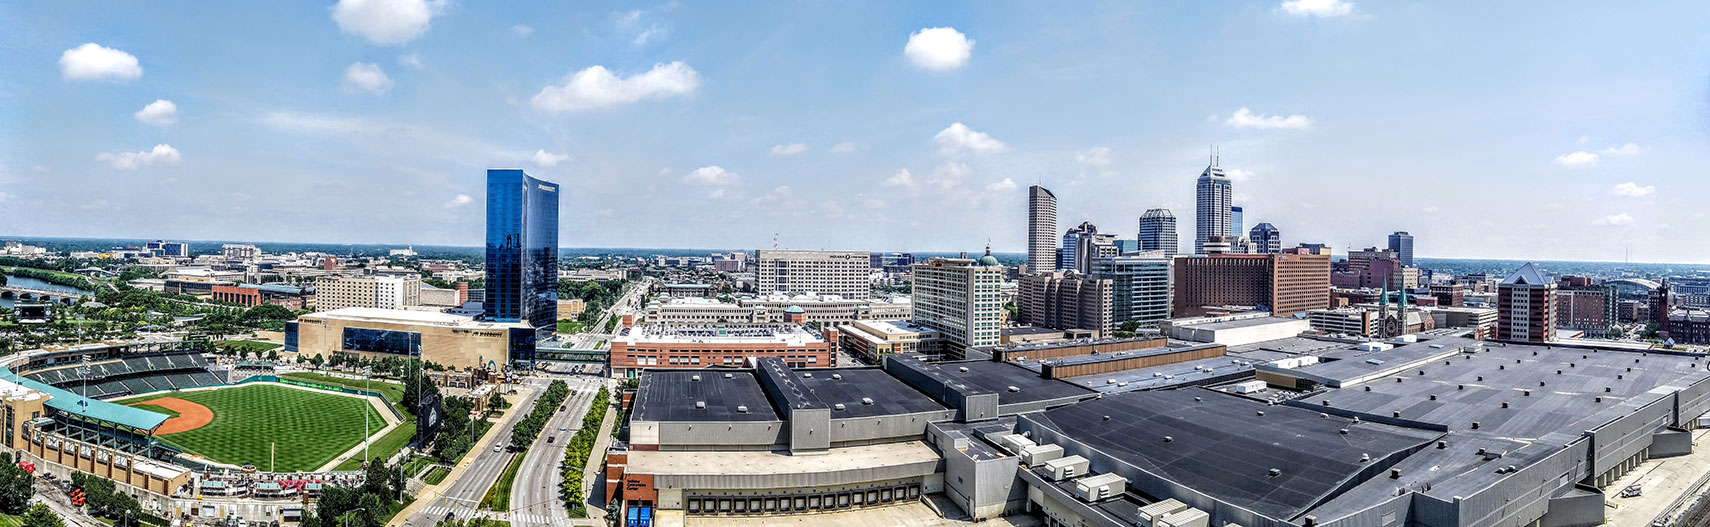 Panorama of Downtown Indianapolis with Indiana Convention Center